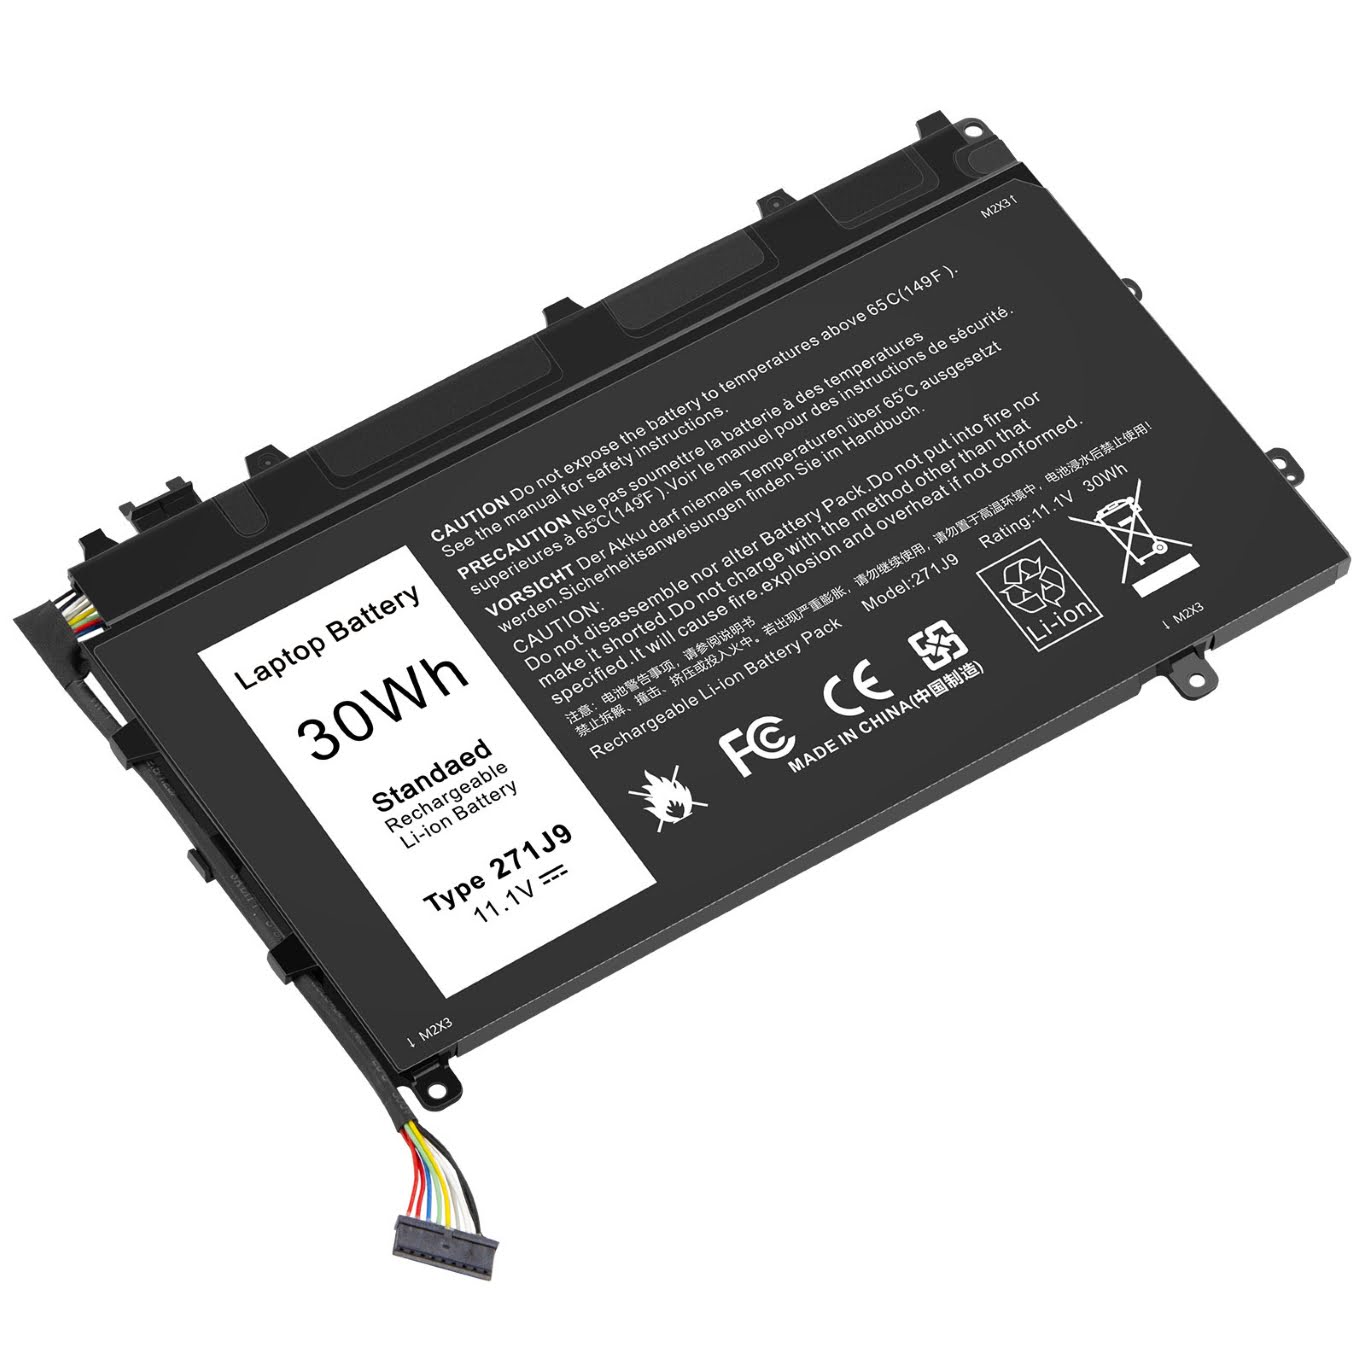 0271J9, 0GWV47 replacement Laptop Battery for Dell Latitude 13 7000, Latitude 13 7000(CAL001LATI735013480), 30wh, 3 cells, 11.1V